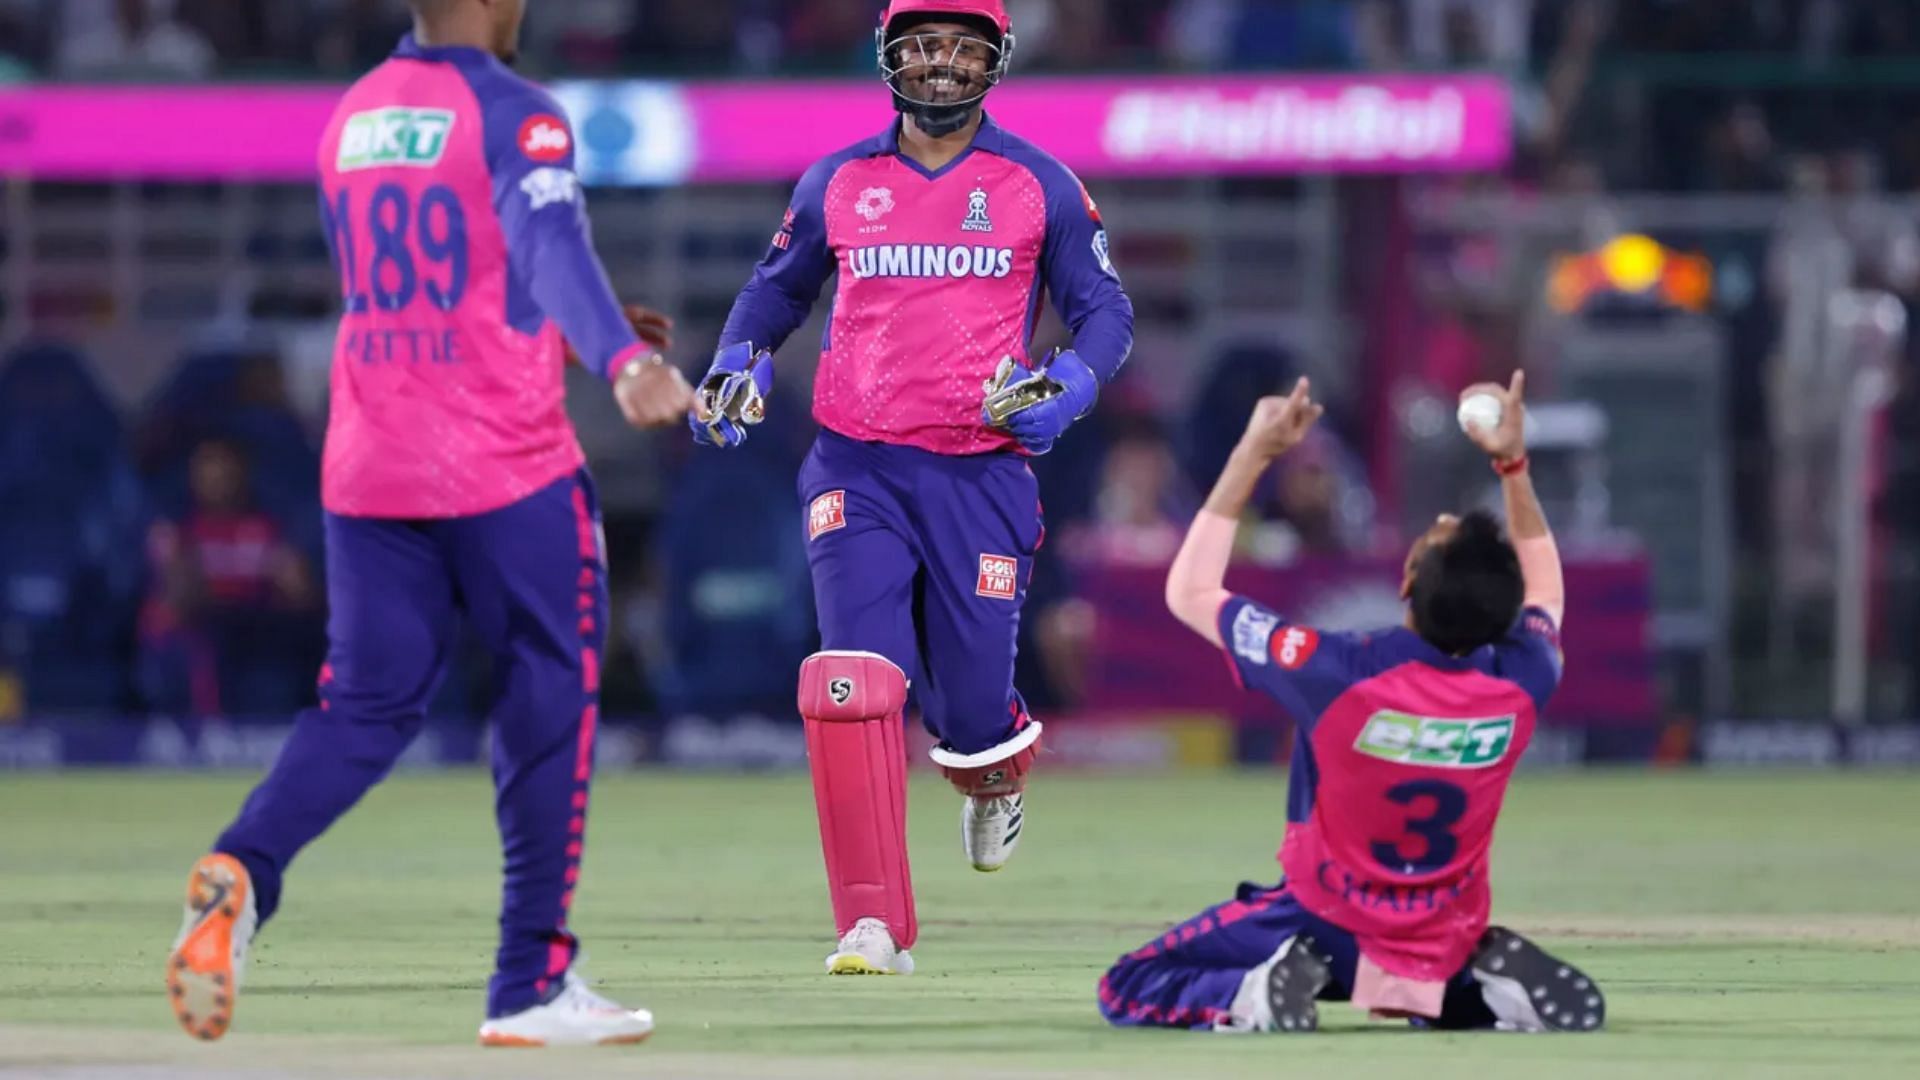 Yuzvendra Chahal celebrates after picking up his 200th IPL wicket against MI on Monday